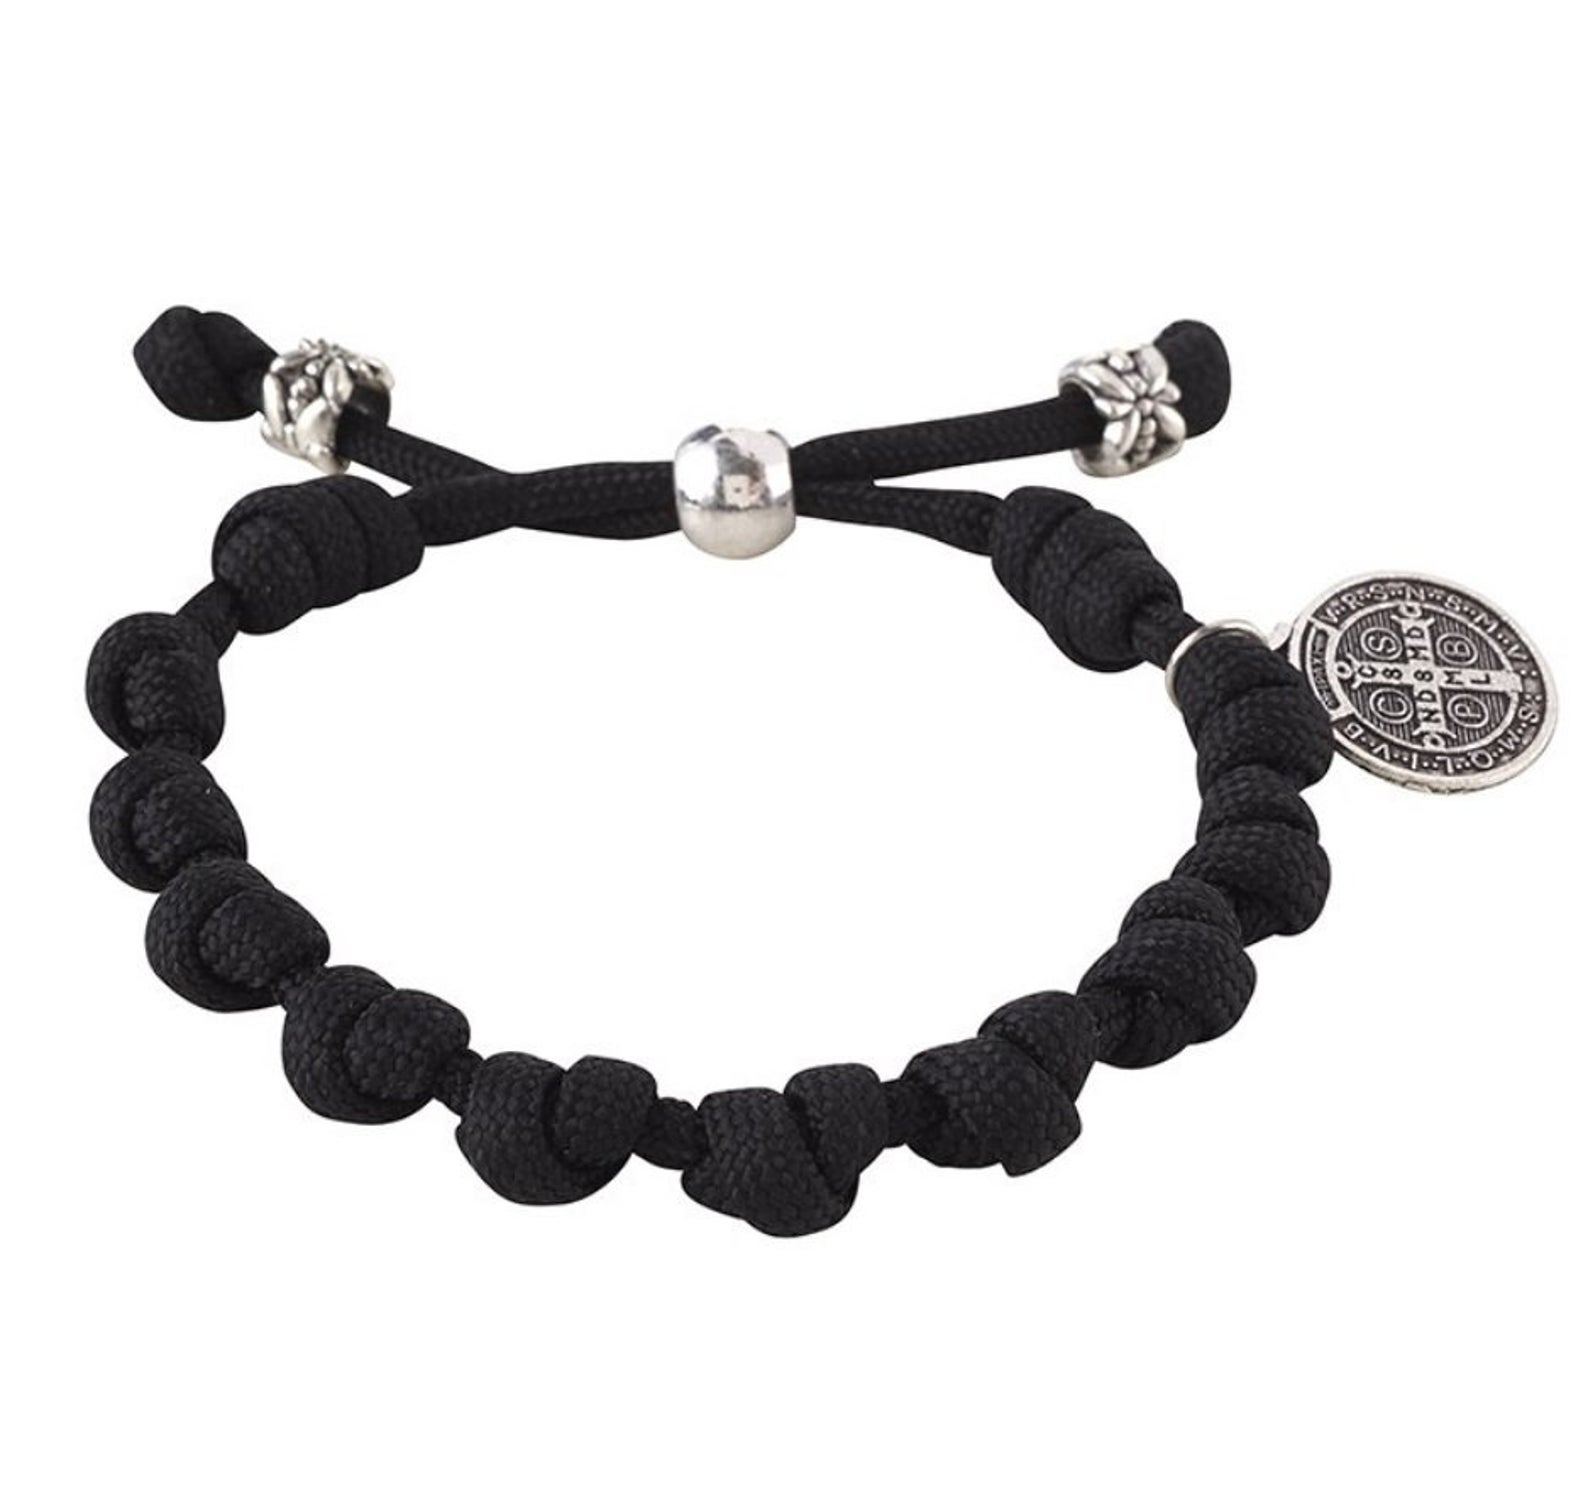 BLACK PARACORD ROSARY BRACELET WITH ST BENEDICT MEDAL - ArmouredCross.com